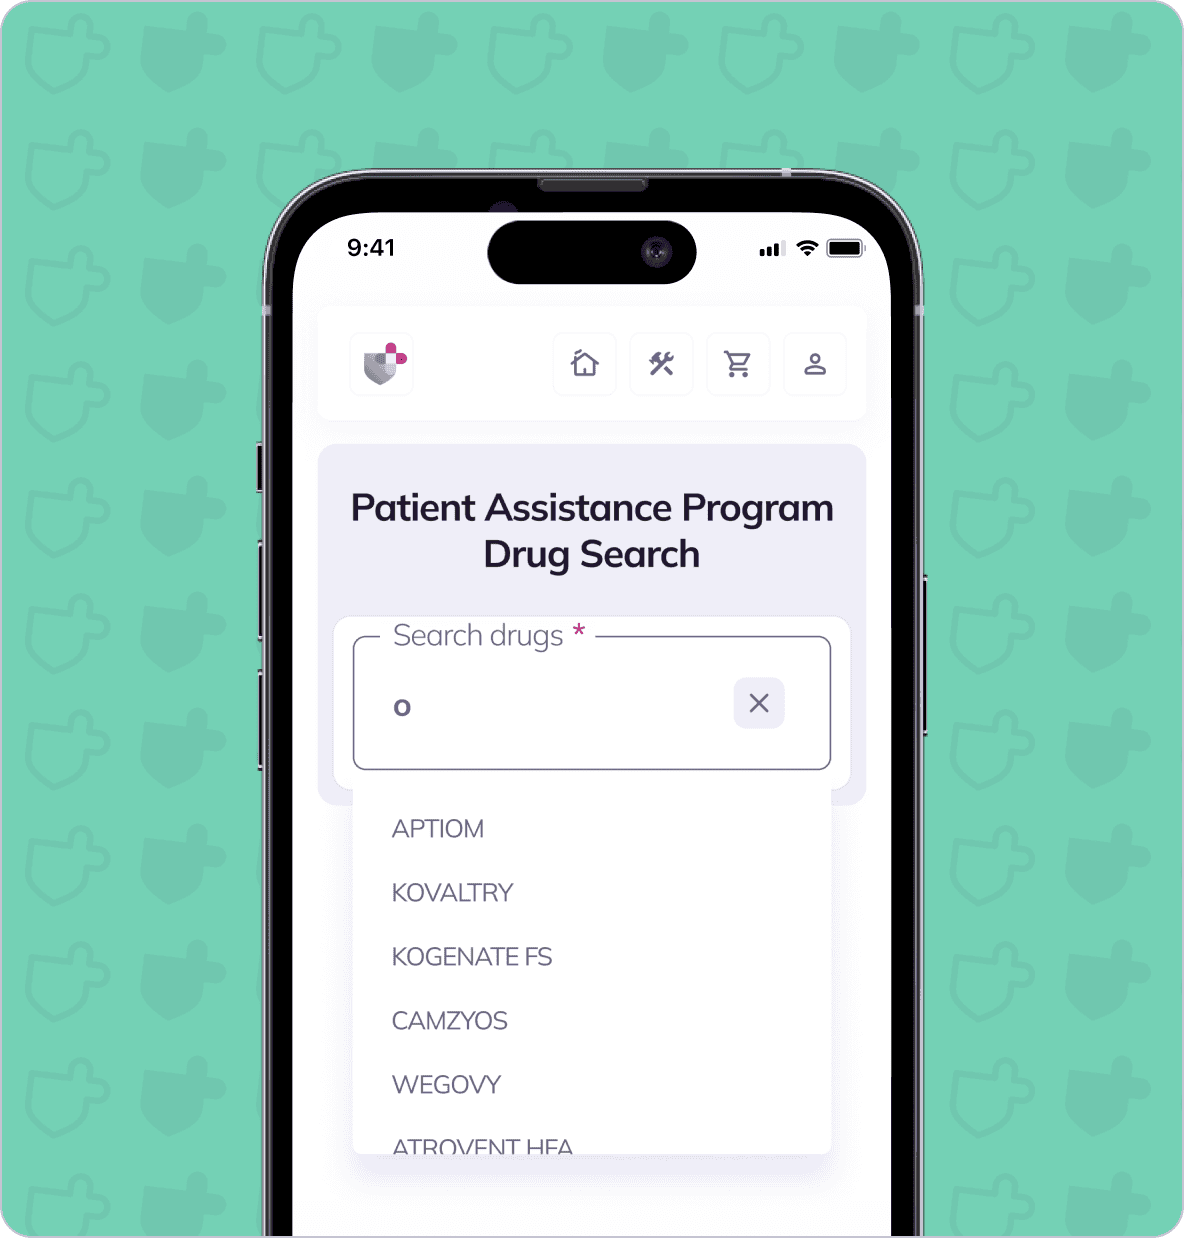 A smartphone screen shows a drug search feature in a Patient Assistance Program app, with drugs like Kovaltry and Camzyos listed. The app has icons/tools at the top and a teal background with shield graphics.